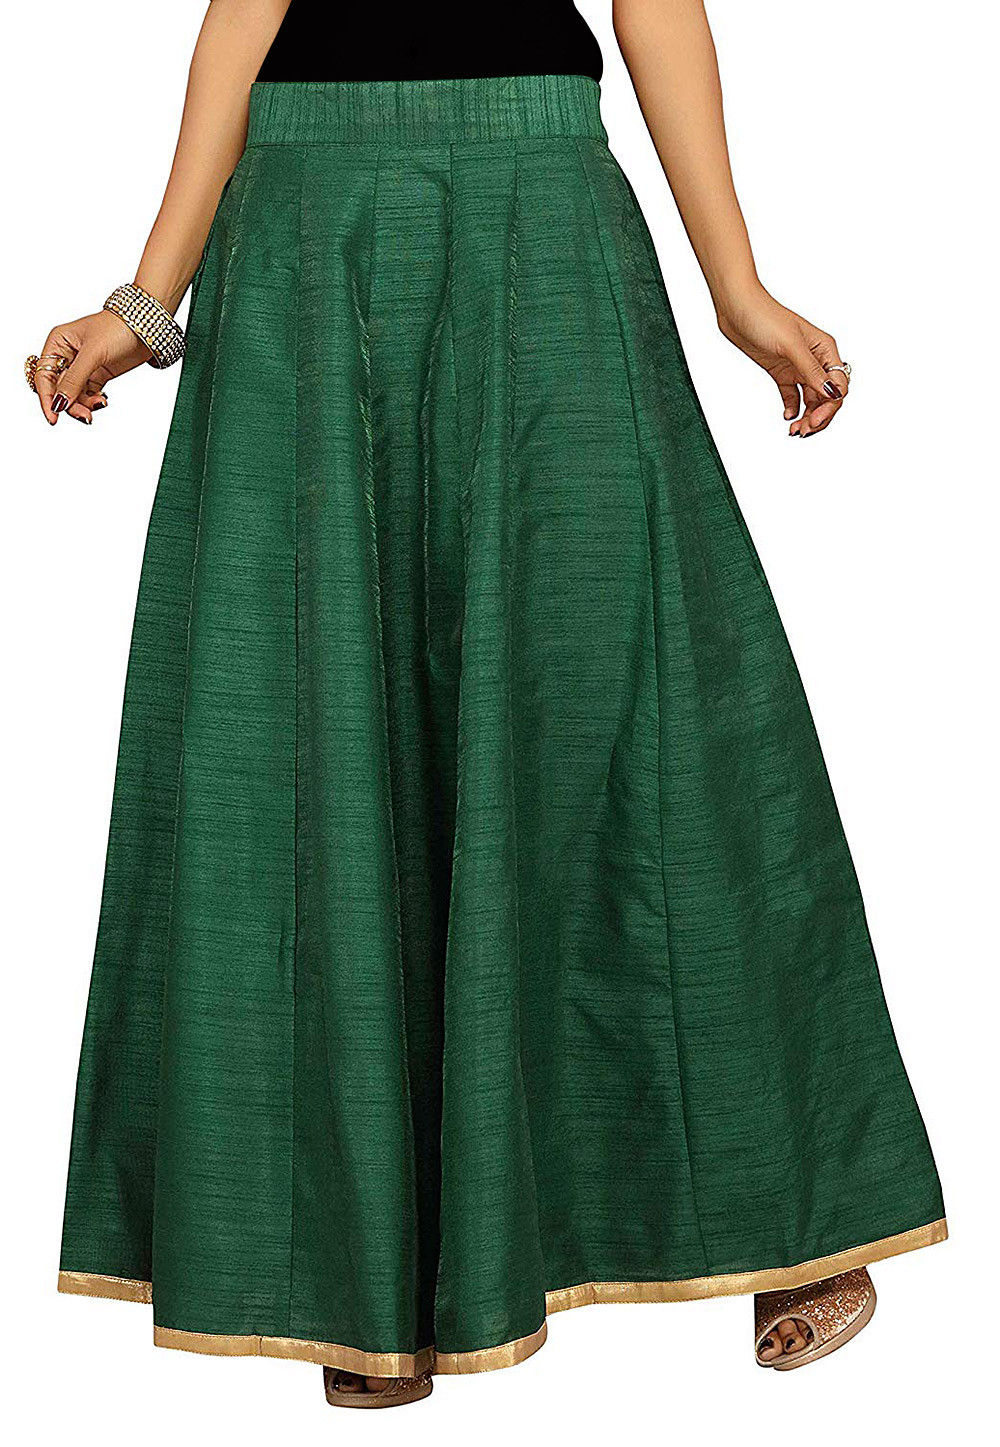 AMAN❤ | Green skirt outfits, Indian dresses, Indian designer outfits